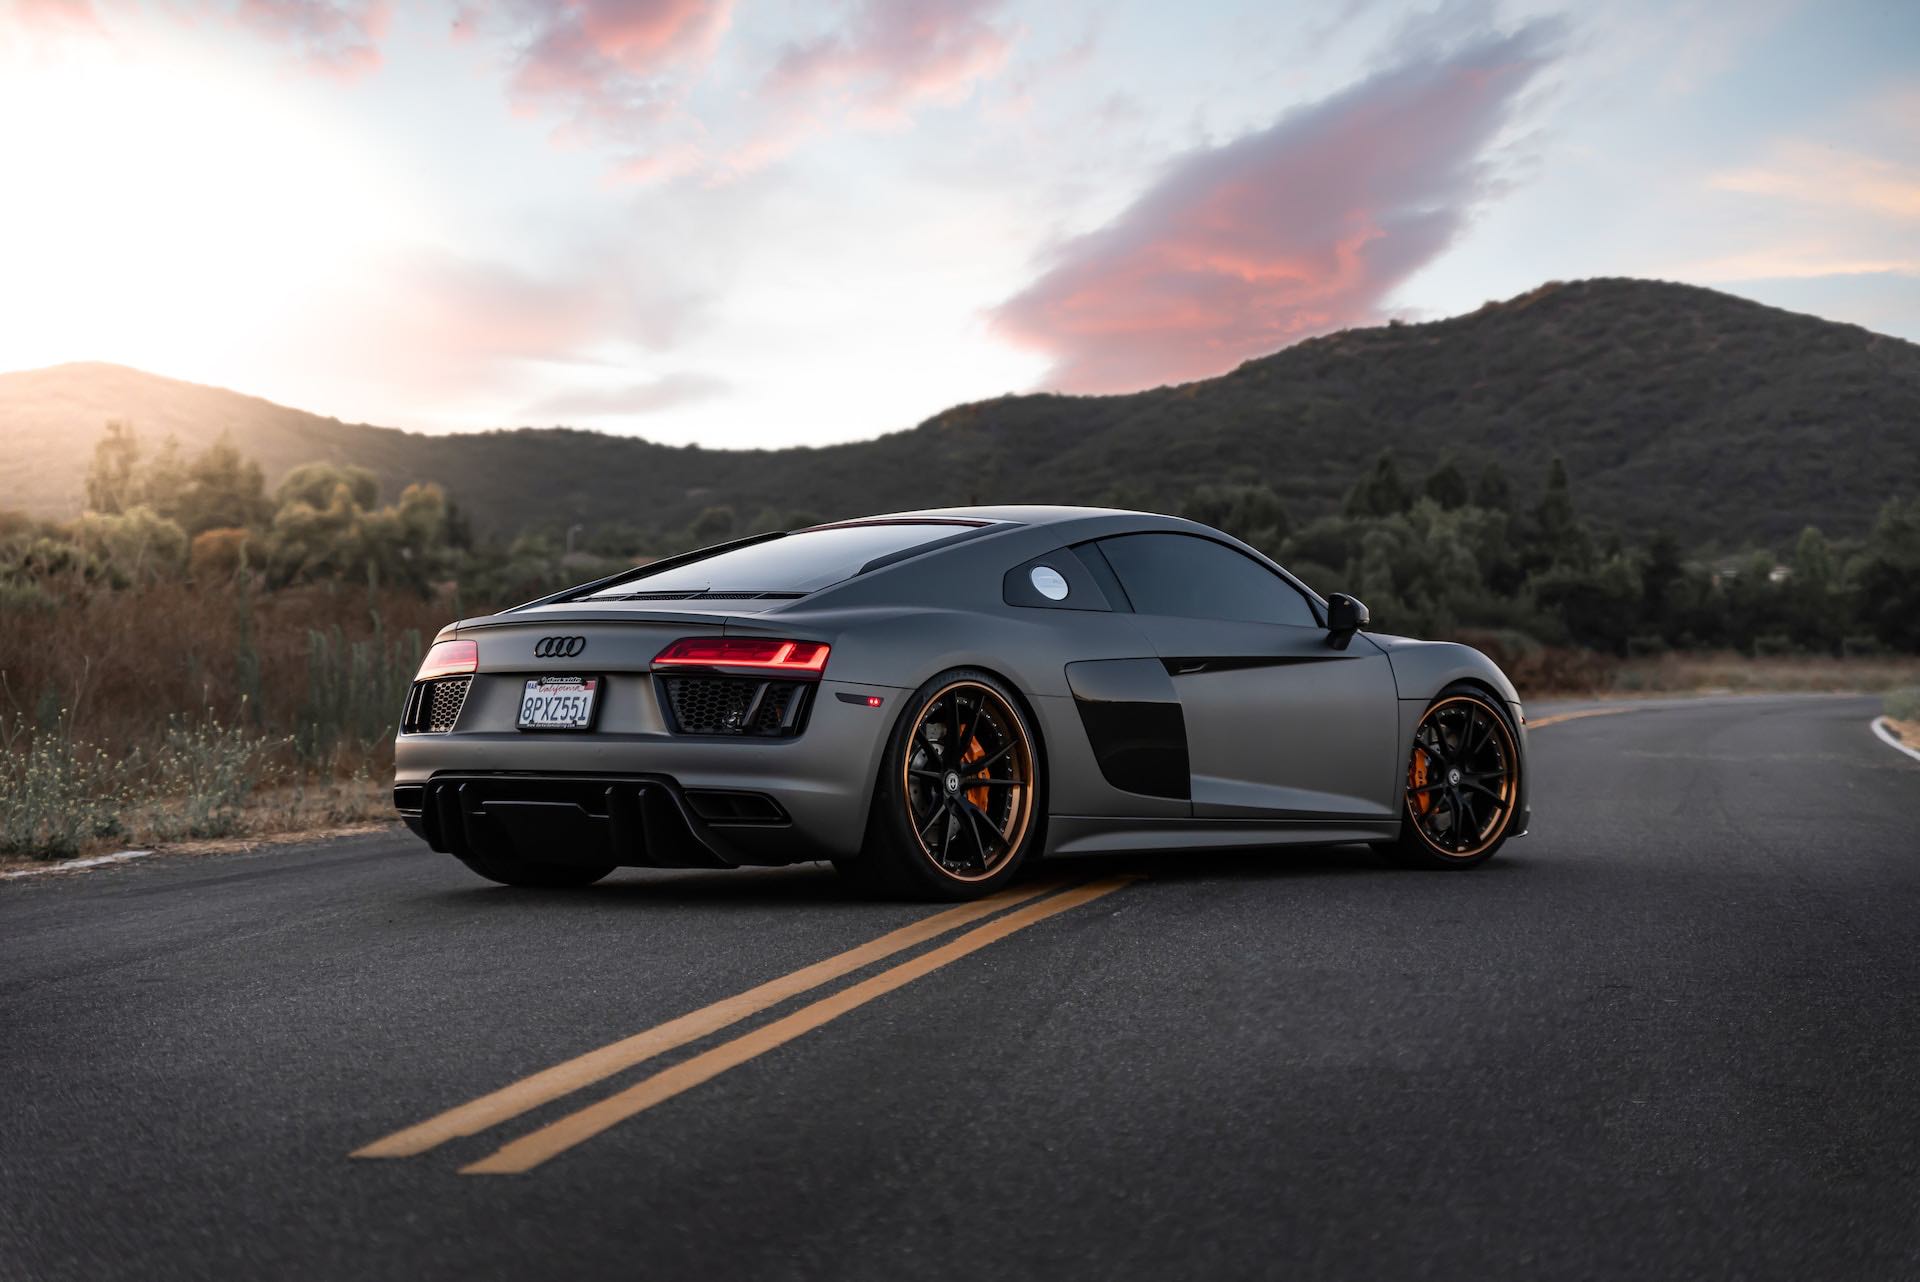 The Audi R8's Swansong: The End of a V10 Legend